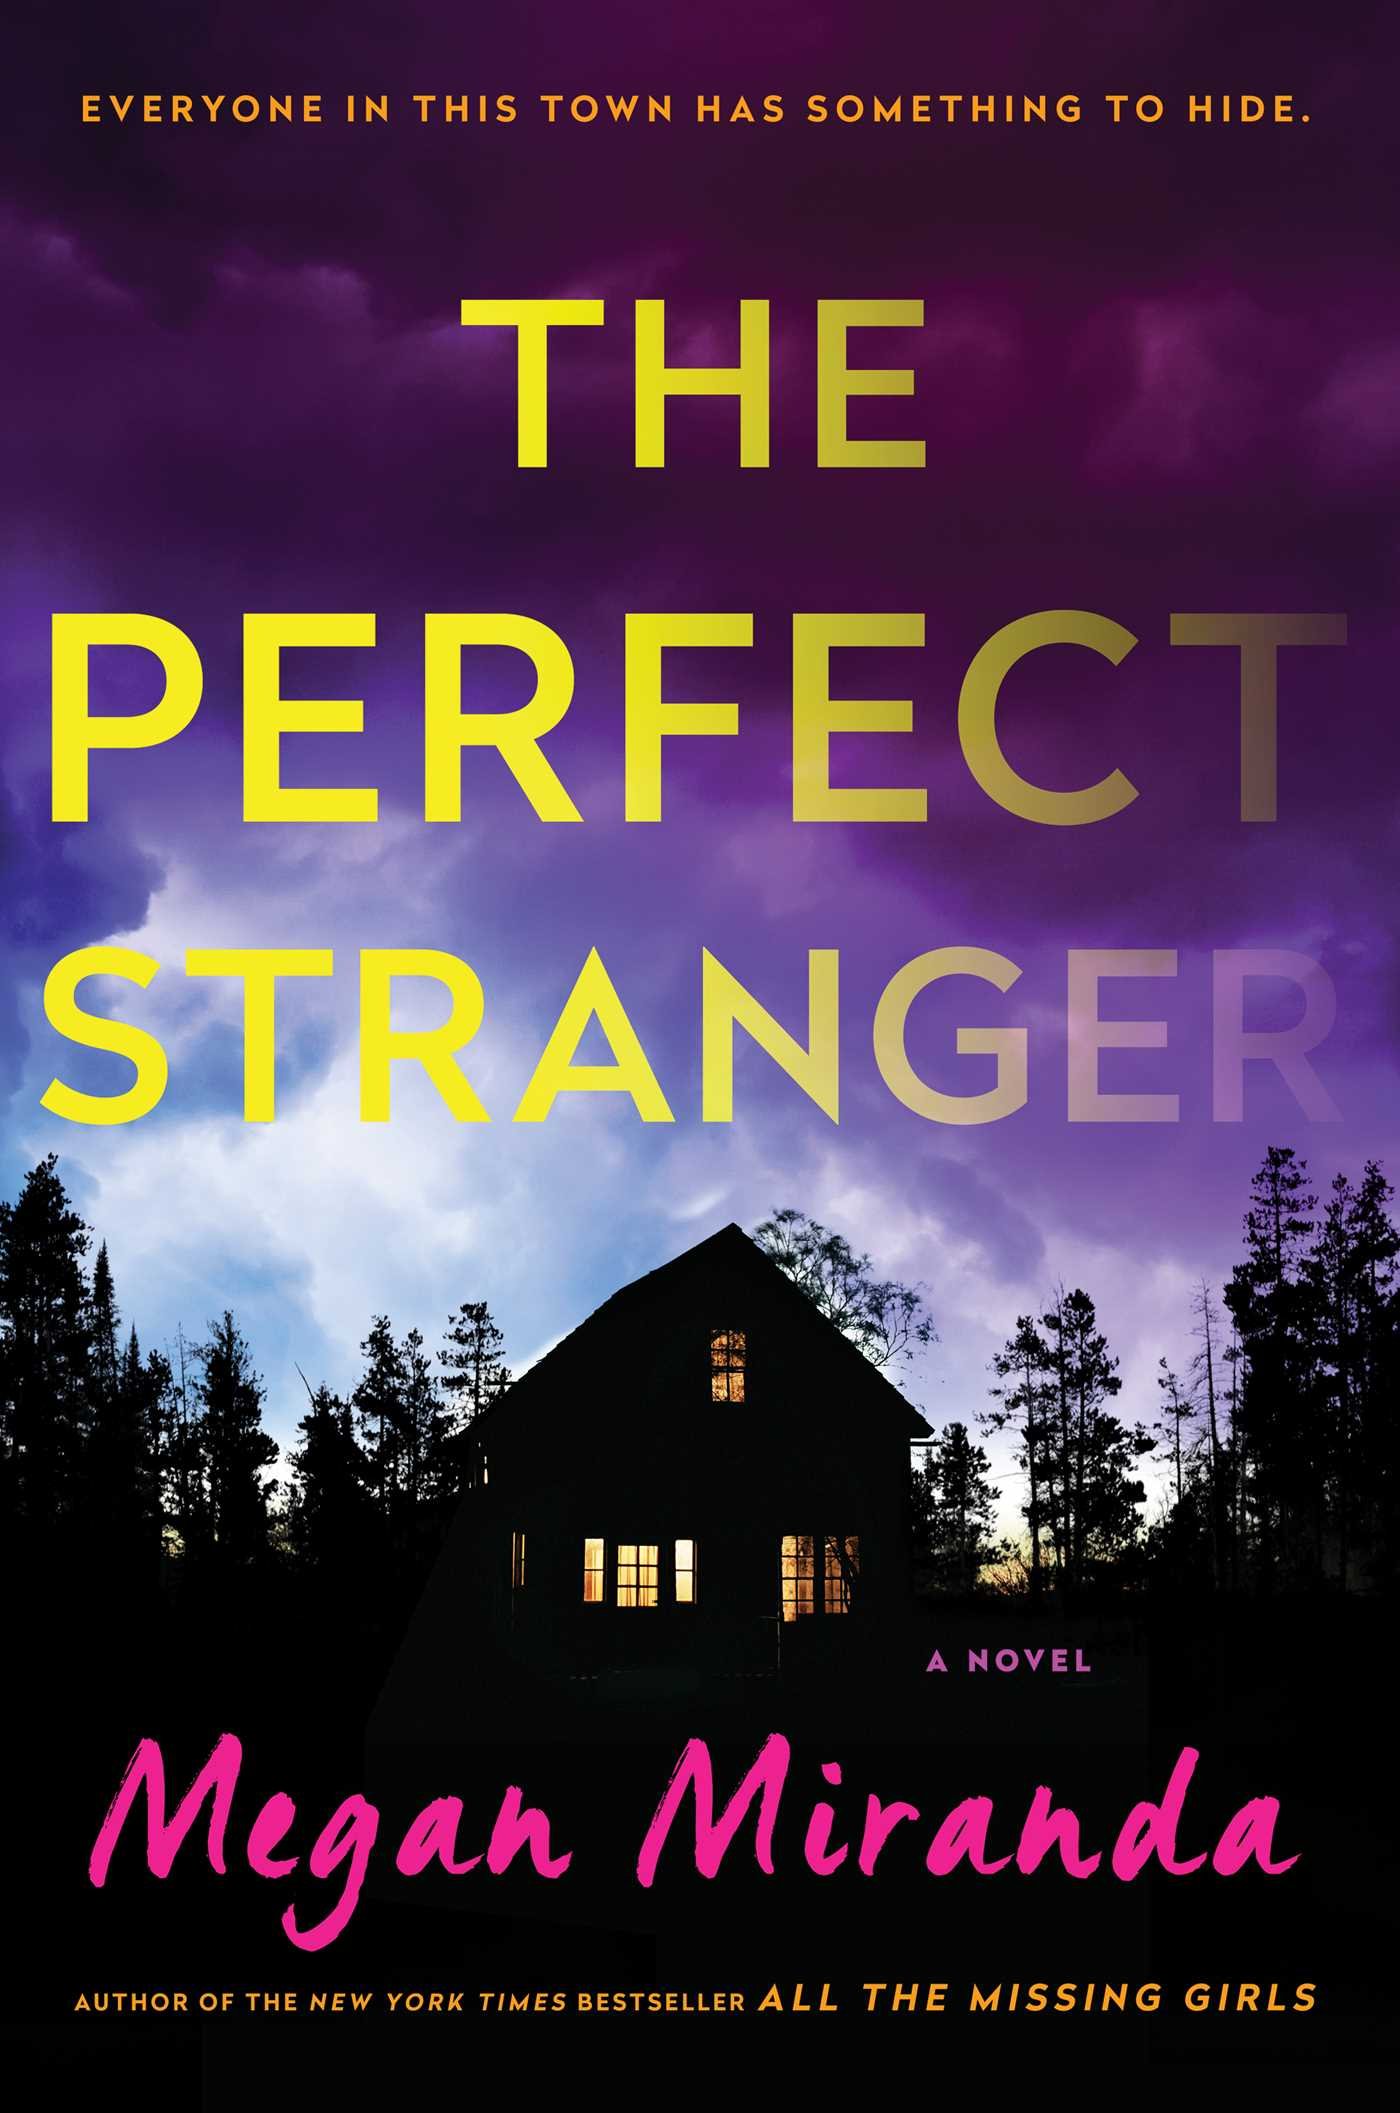 Image for "The Perfect Stranger"